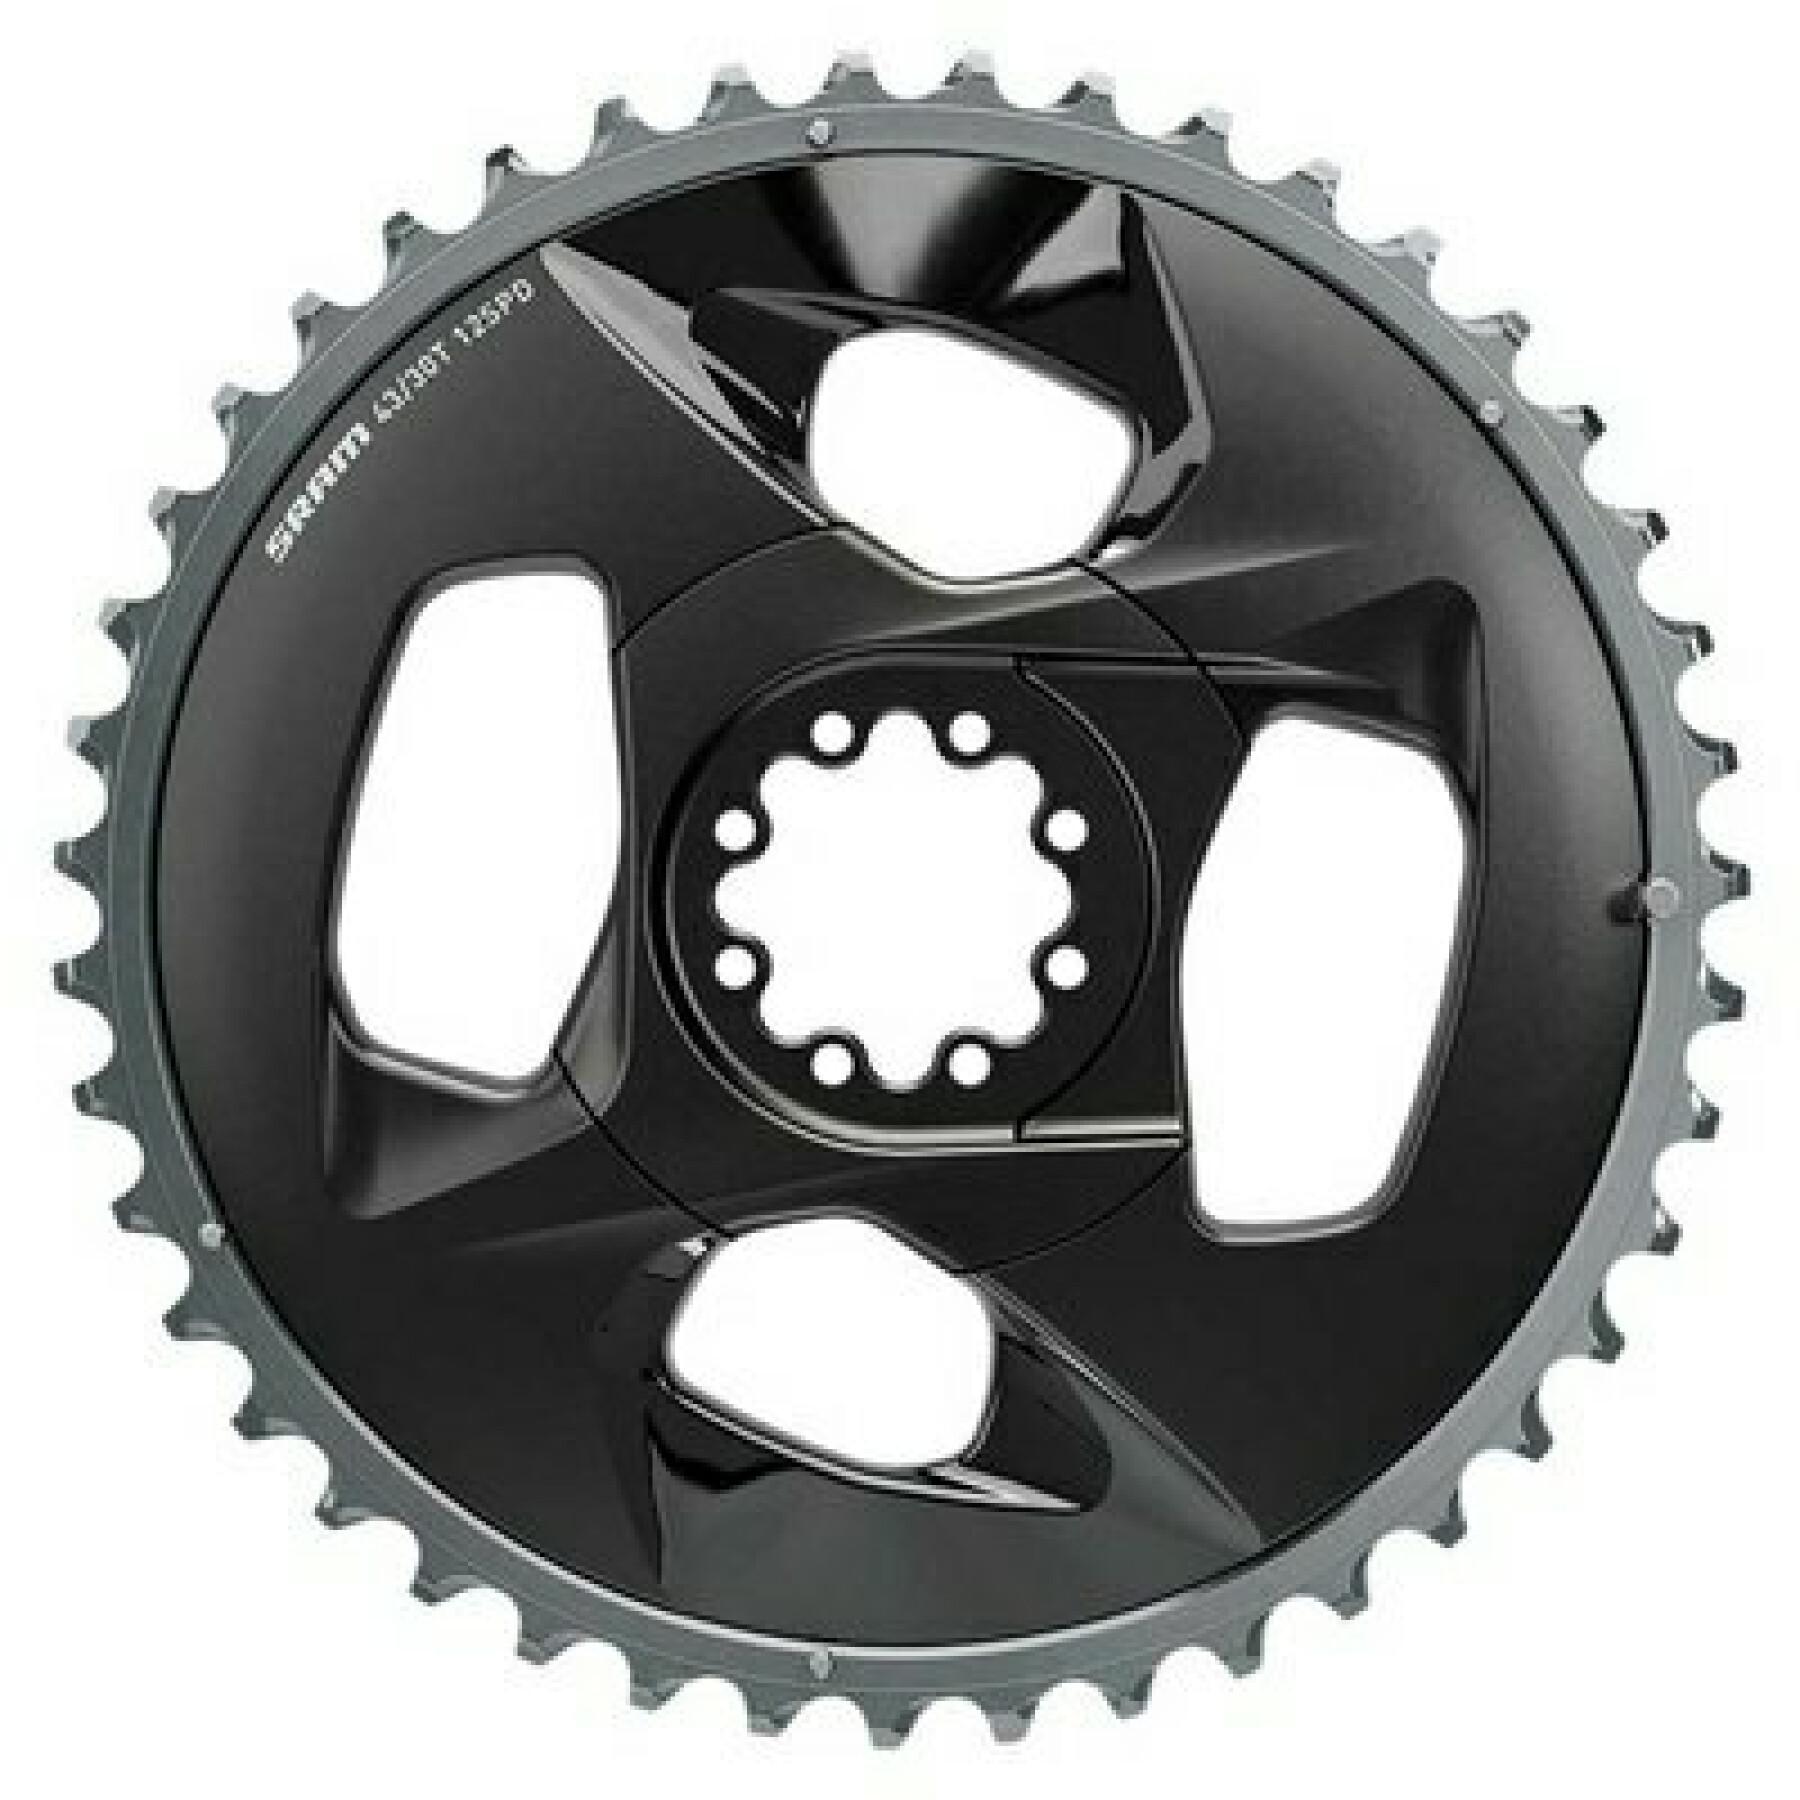 Tablett Sram Plateau Route Force Wide 30d 94bcd 2x12 Nr